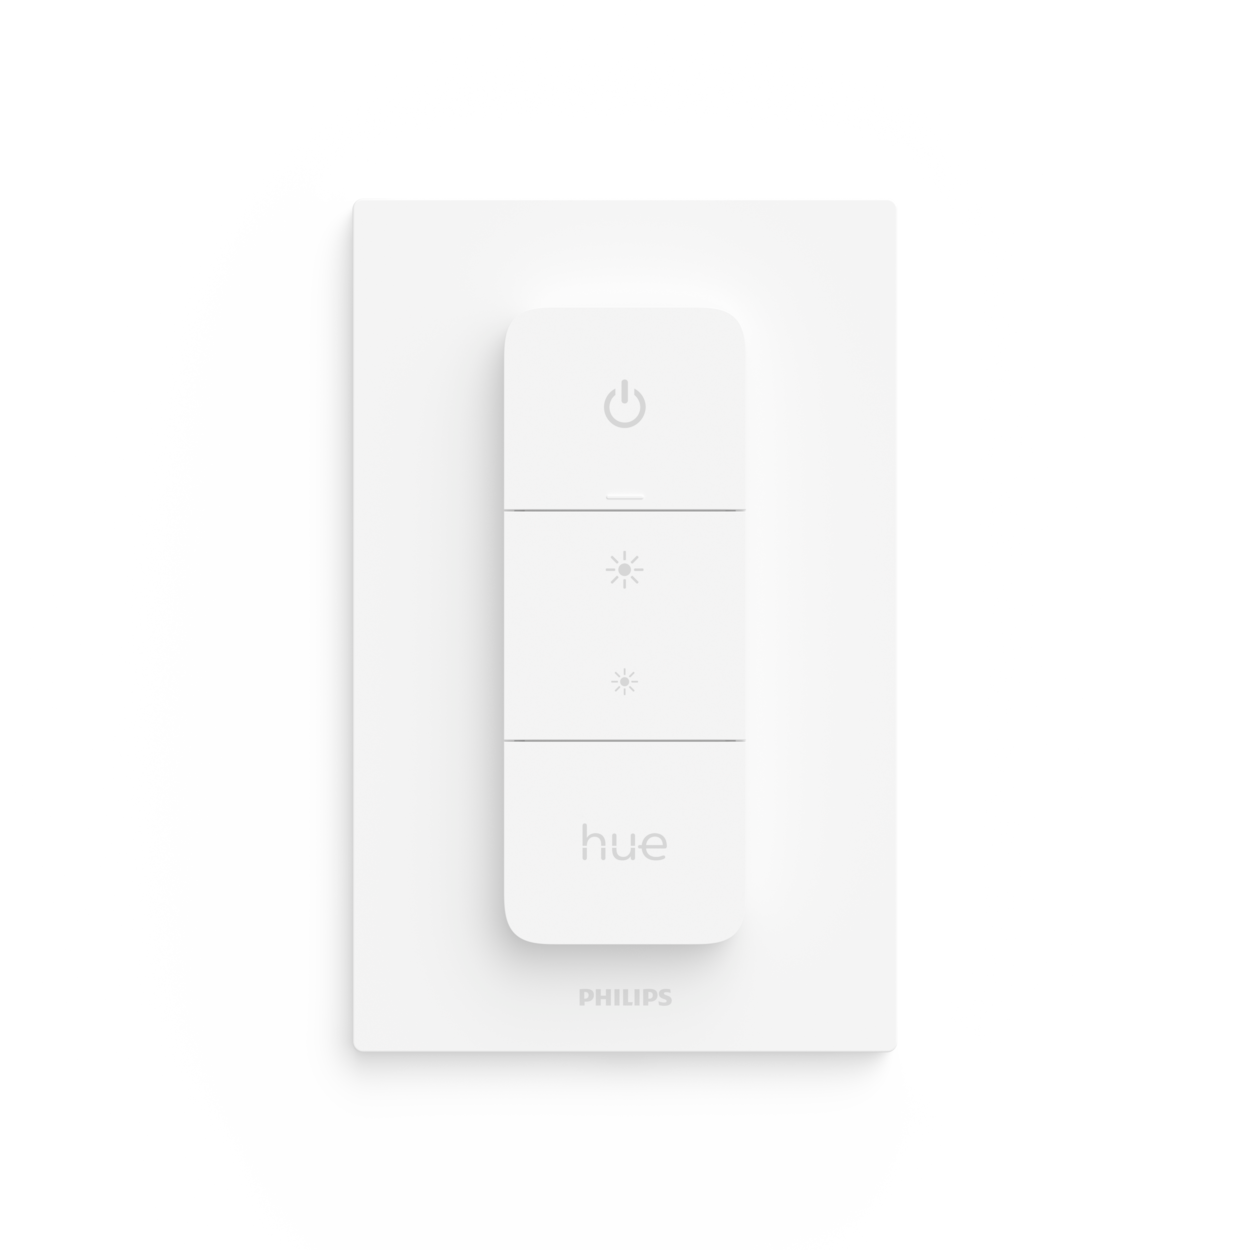 Philips Hue Dimmer Switch front